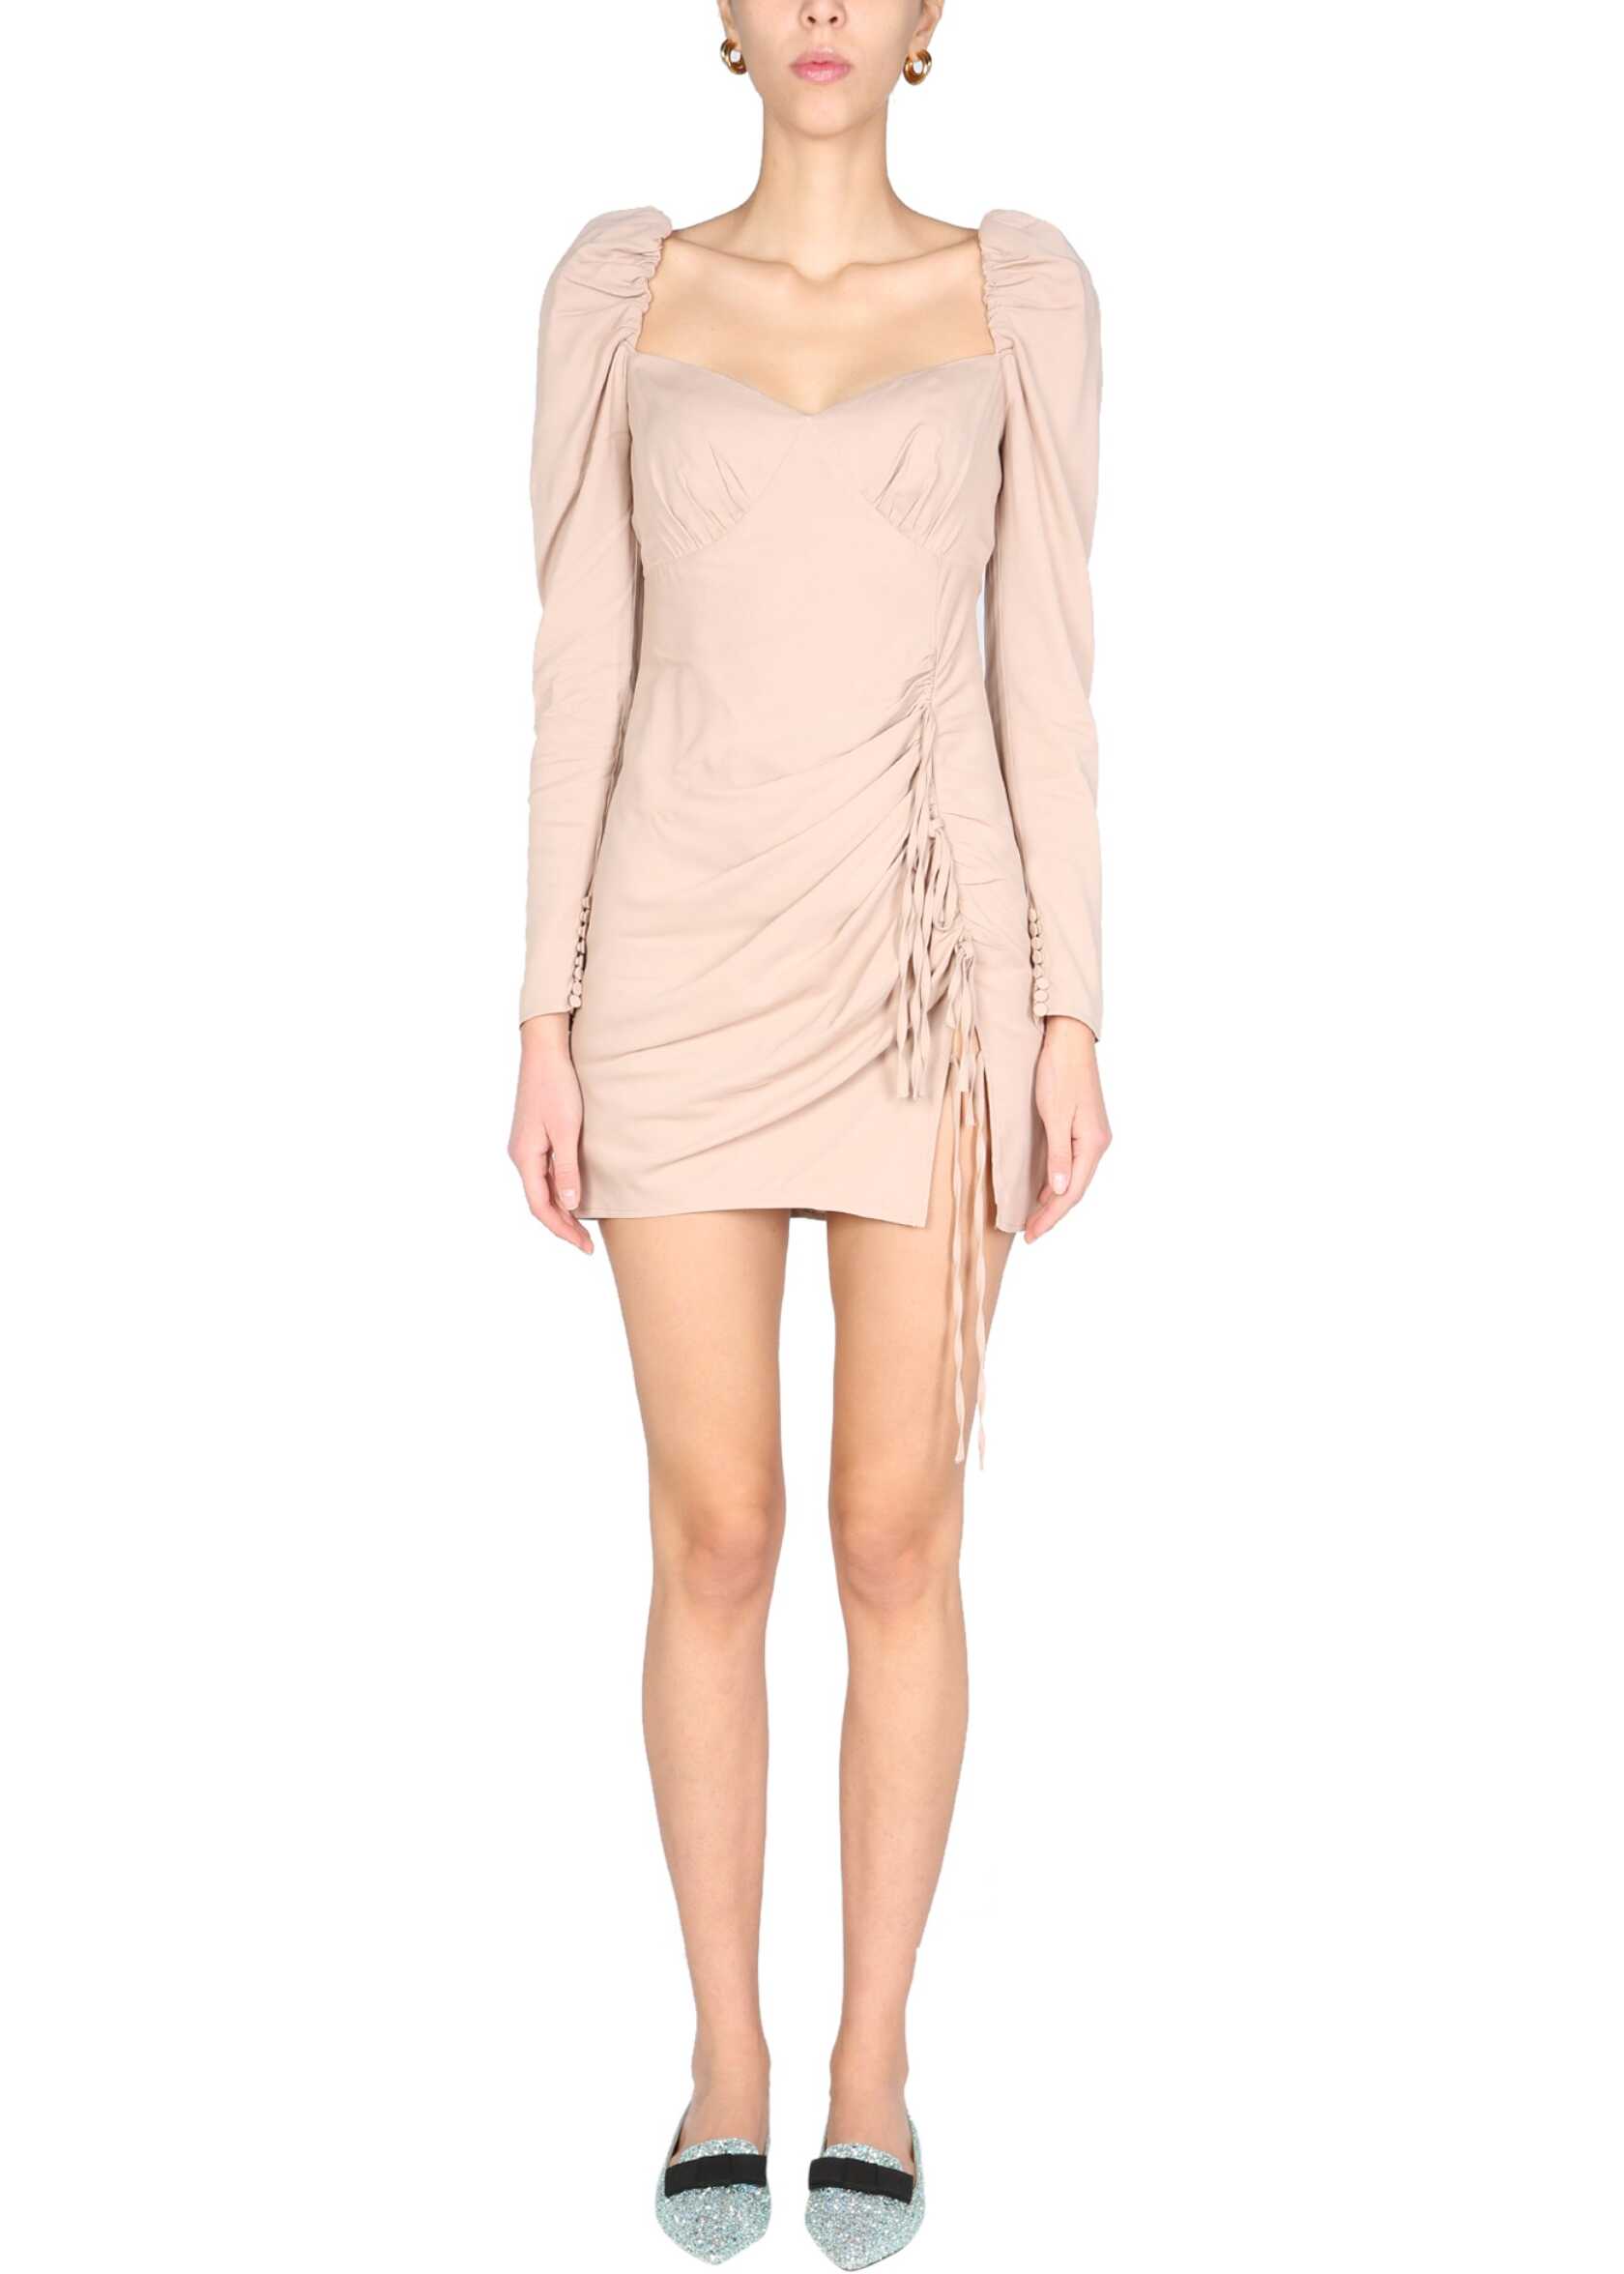 Self-Portrait Dress With Draping RS22-114S_FROSTEDALMOND BEIGE